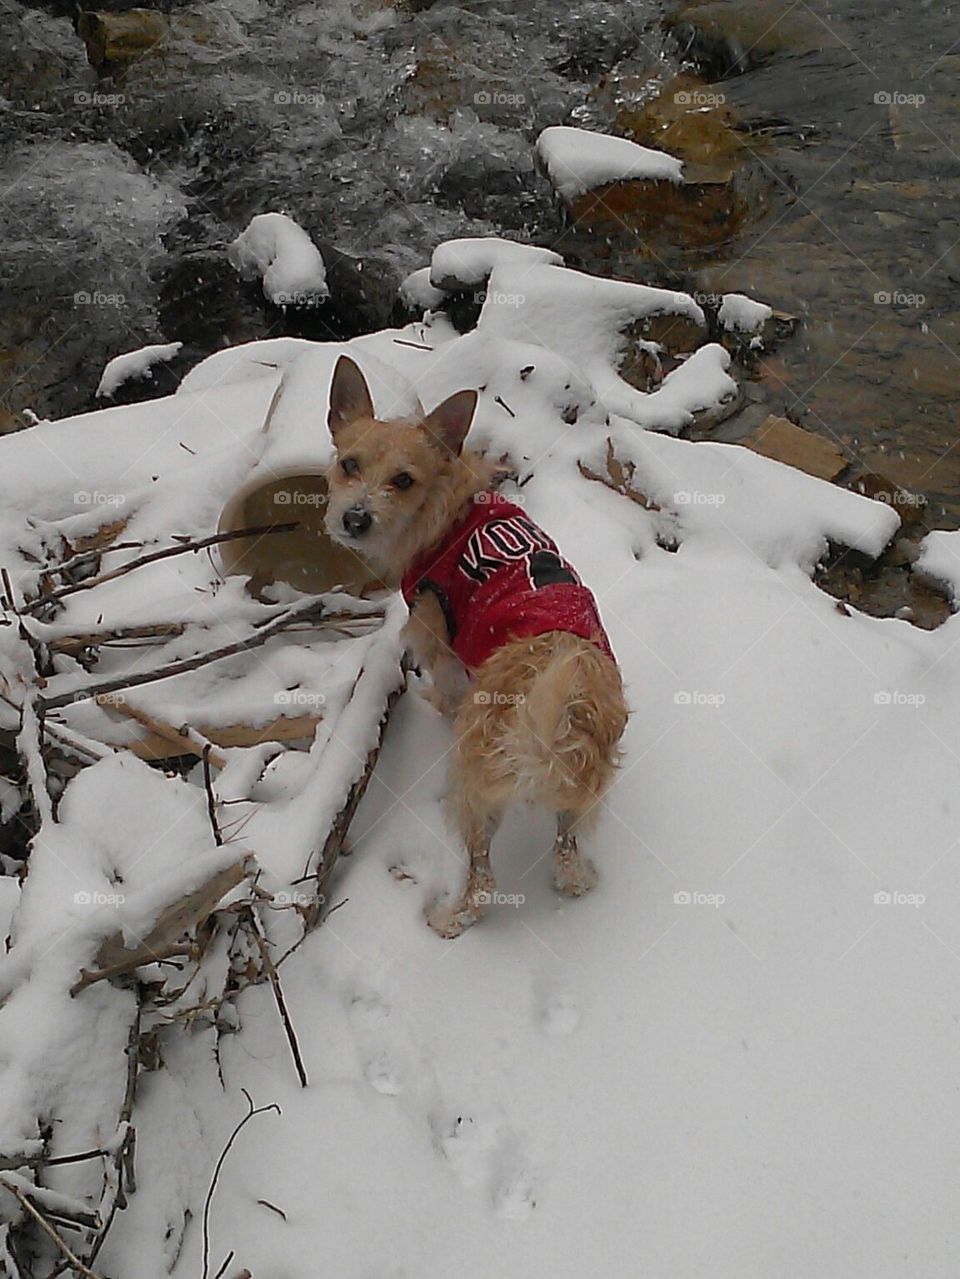 Pepper in the Snow